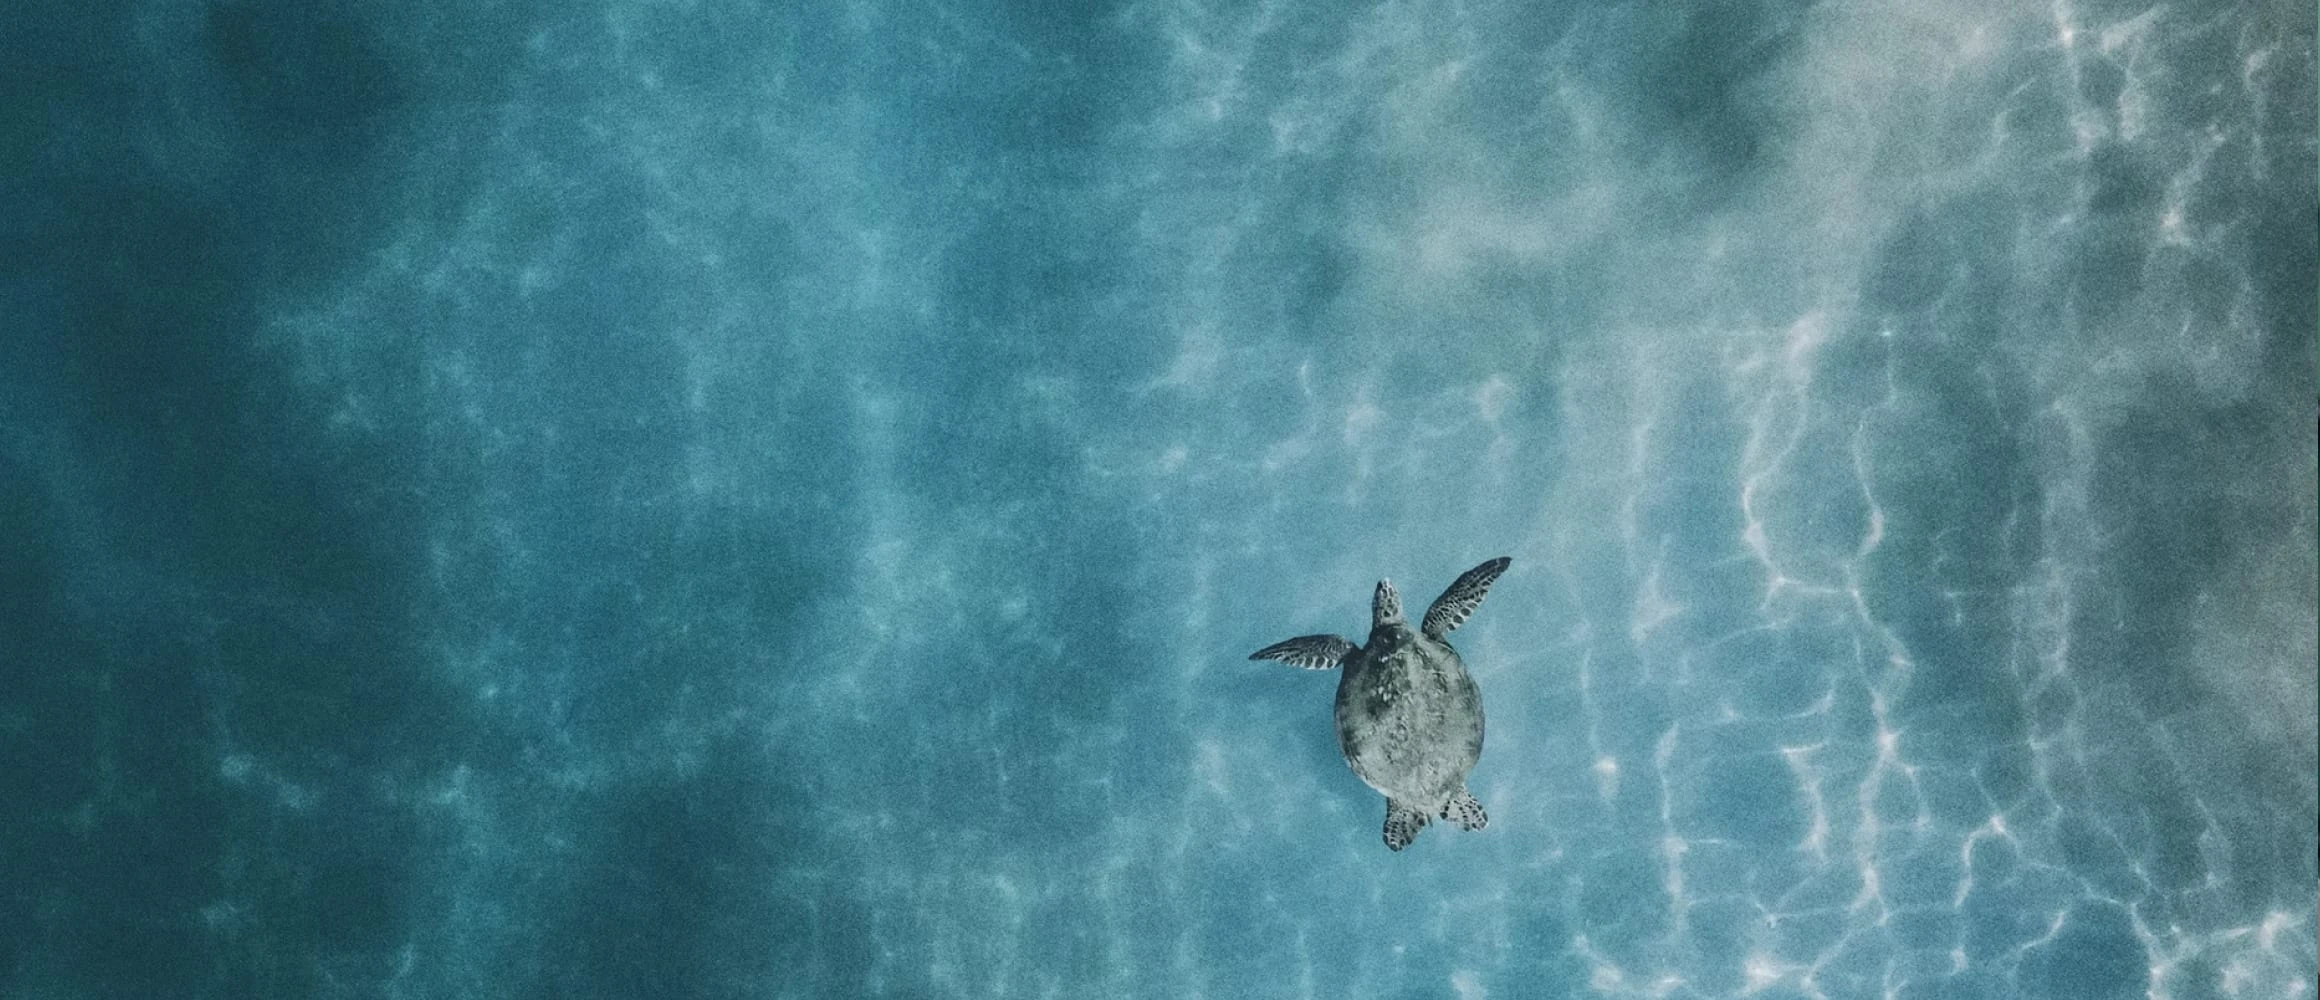 A turtle swimming in blue water